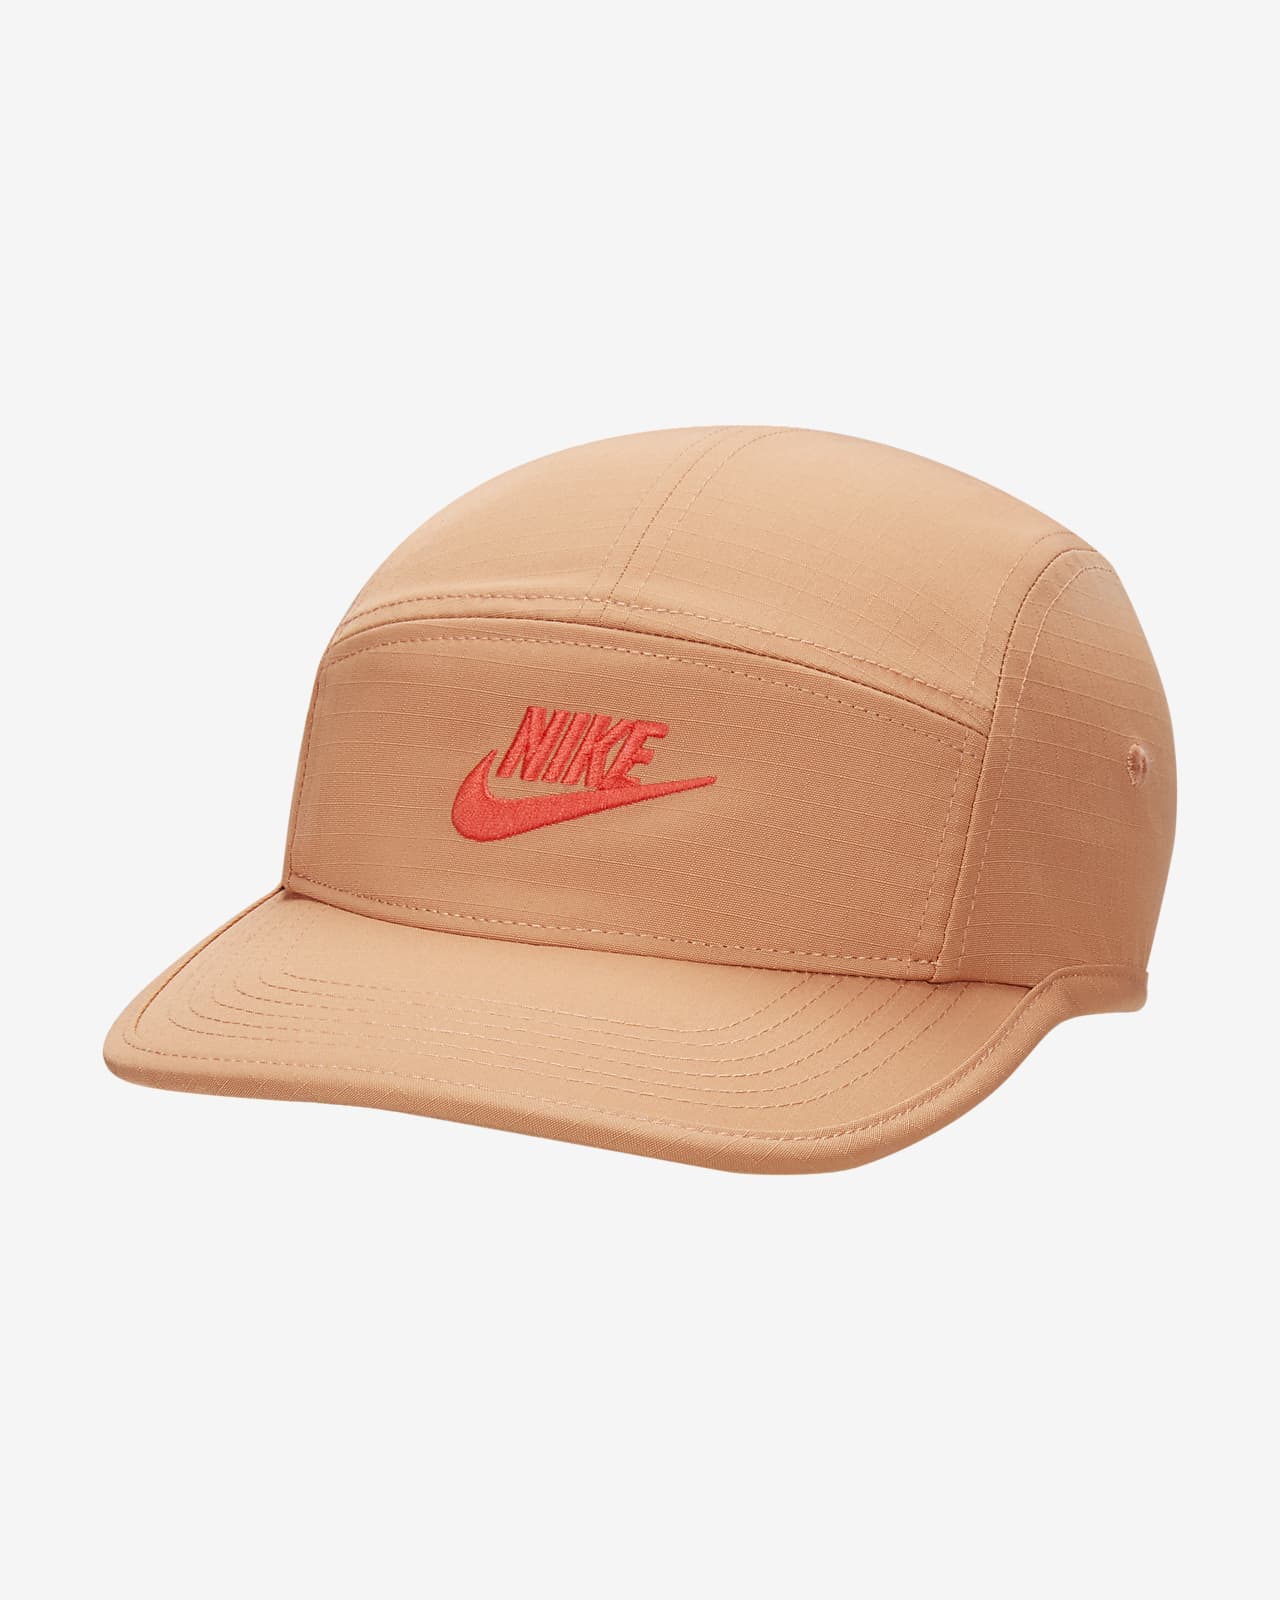 Nike. Baseball Cap - clothing & accessories - by owner - apparel